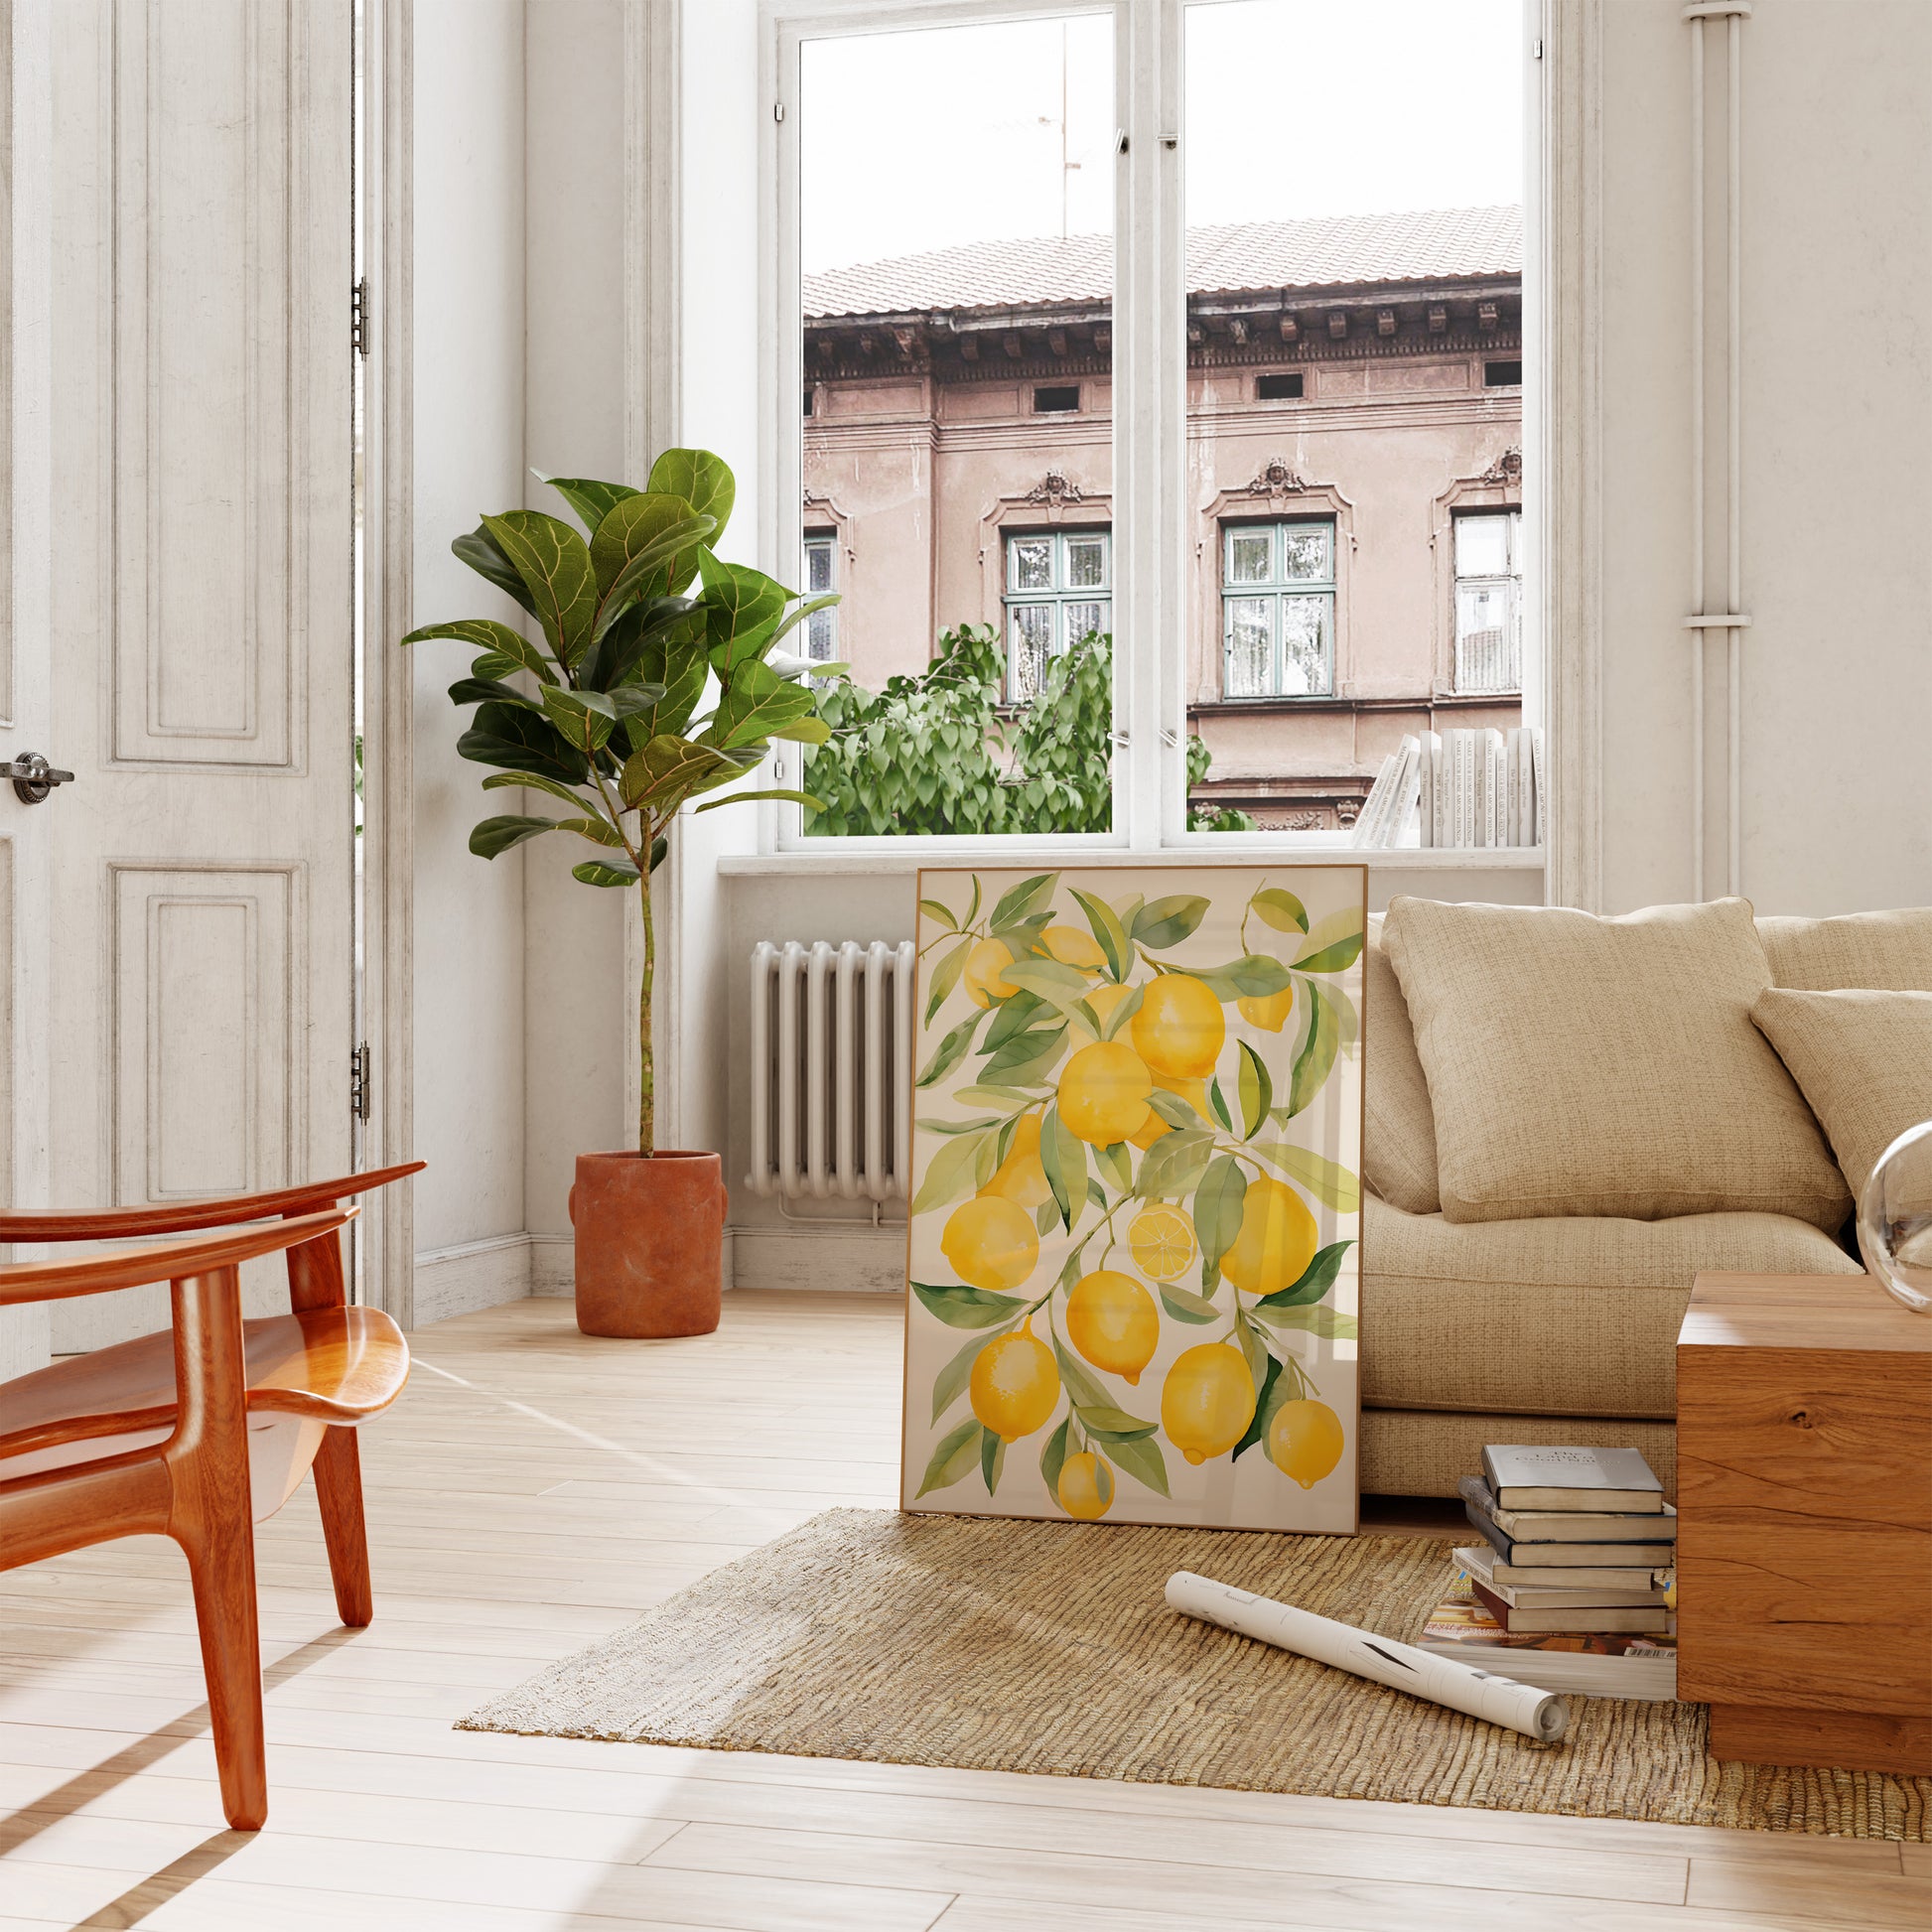 Bright living room with a lemon painting, green plant, and cozy sofa by a window.